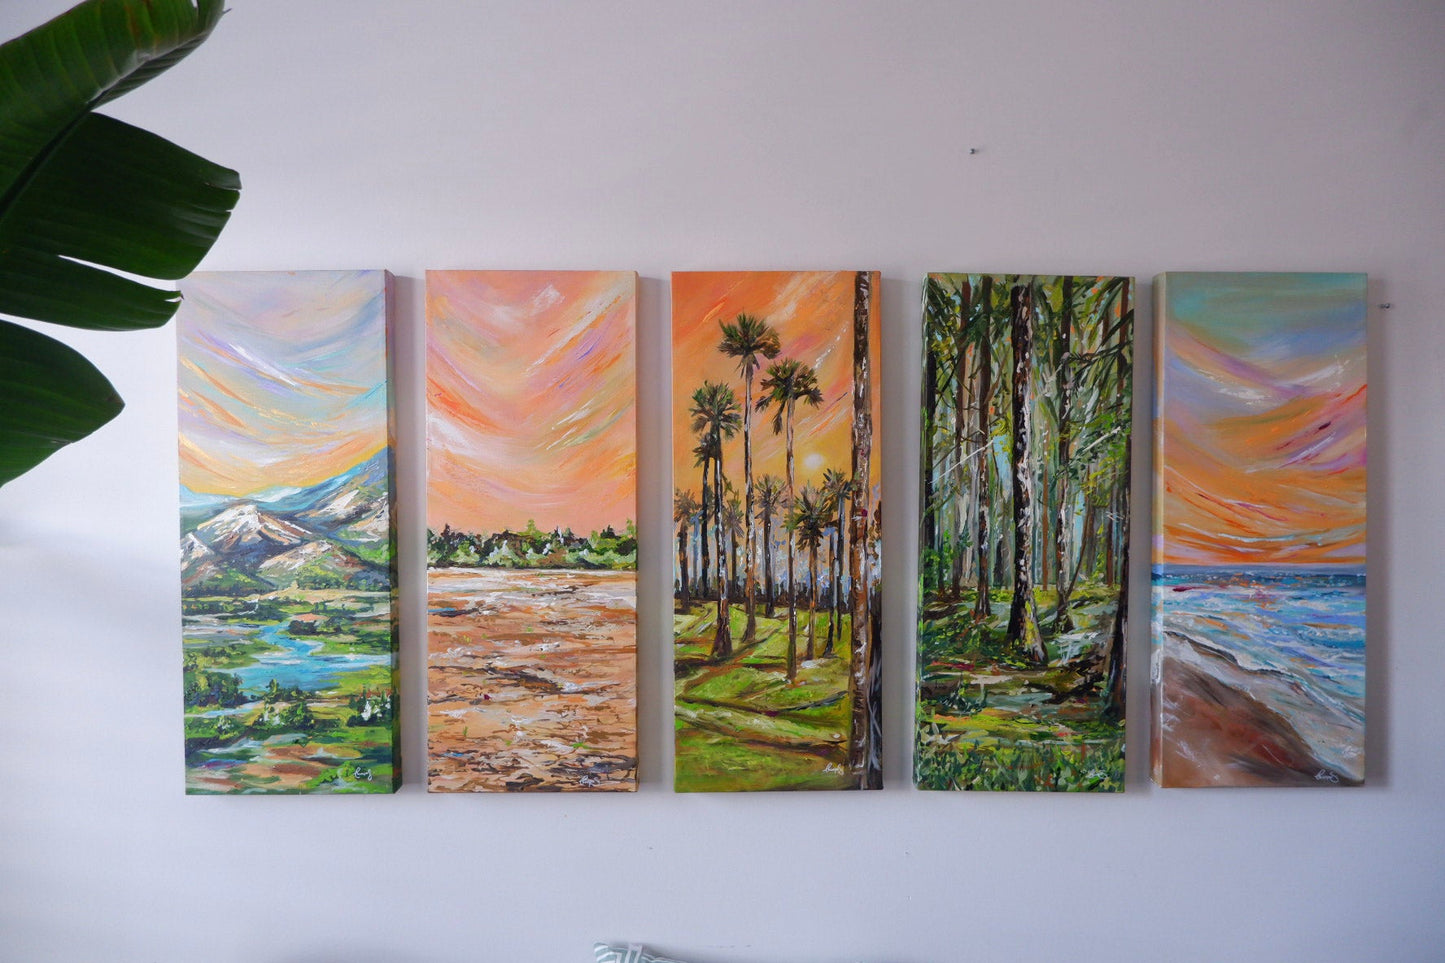 'Within The Forest' - 5 Panel Travel Series' - Landscape Print